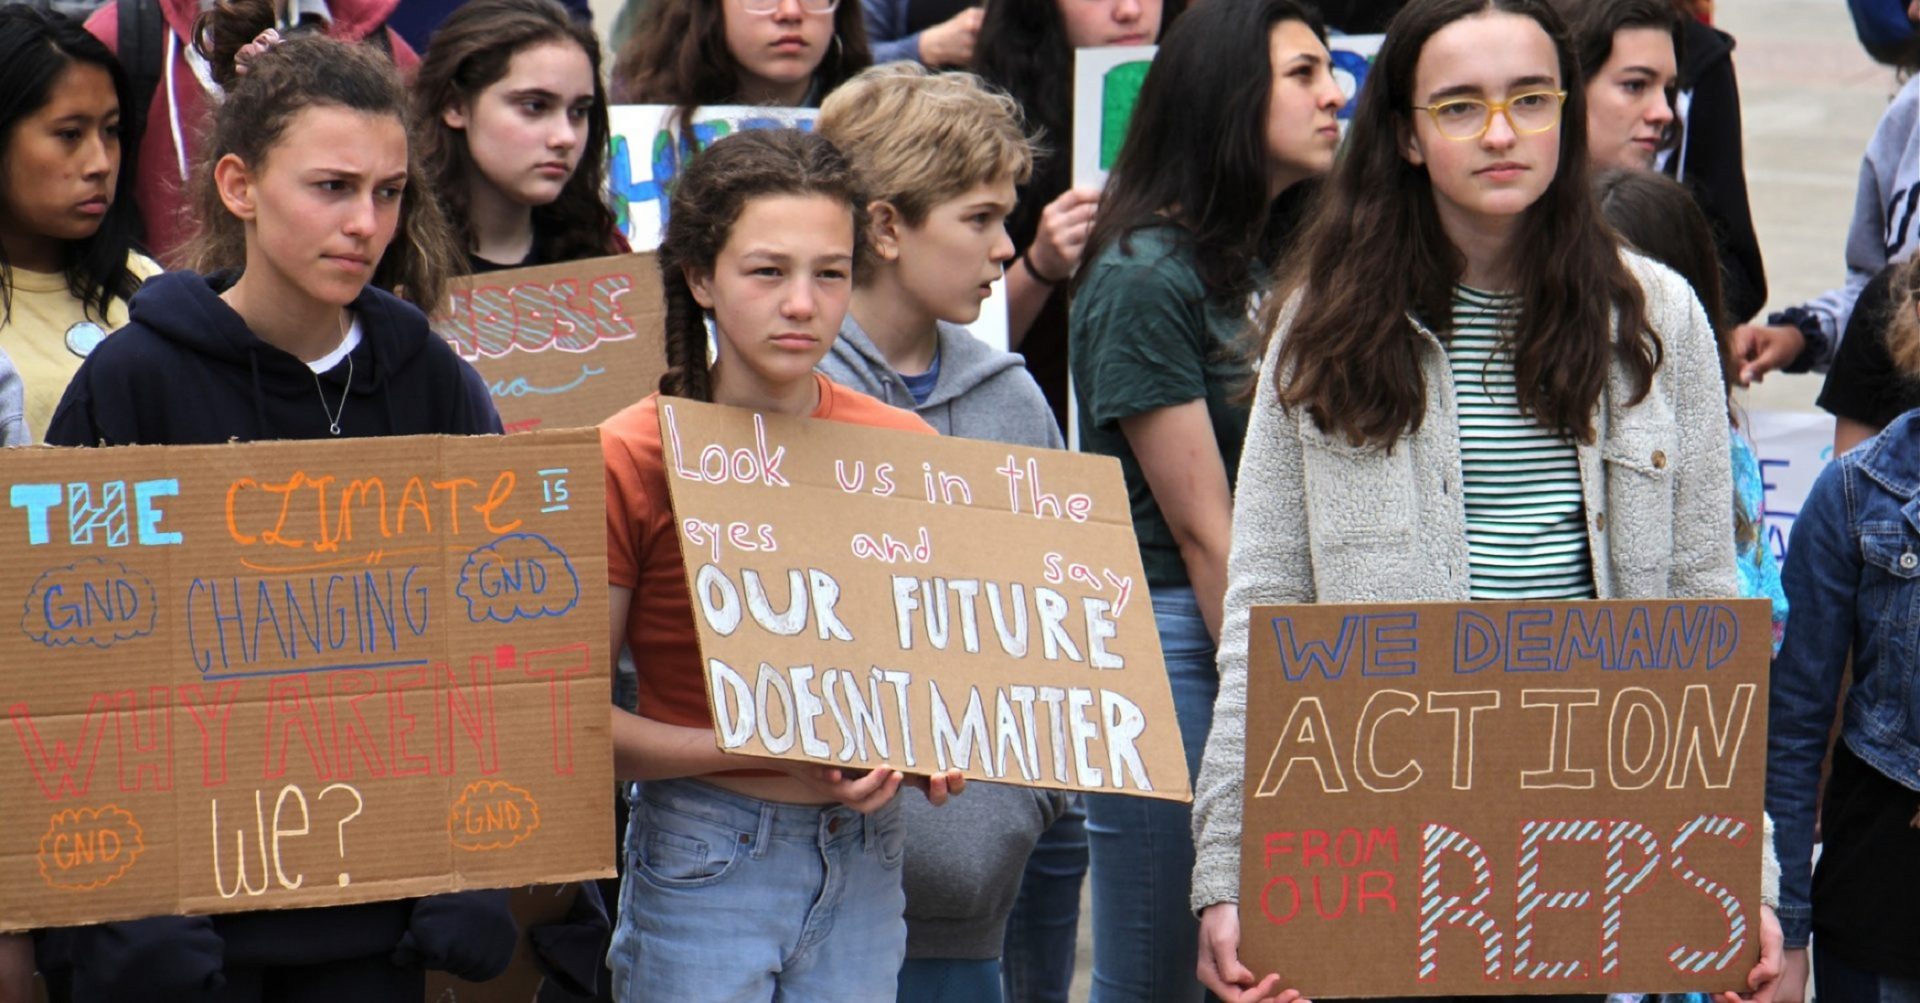 Philadelphia students cut class Friday, May 3, 2019 to participate in a rally at Thomas Paine Plaza to protest inaction on climate change issues.